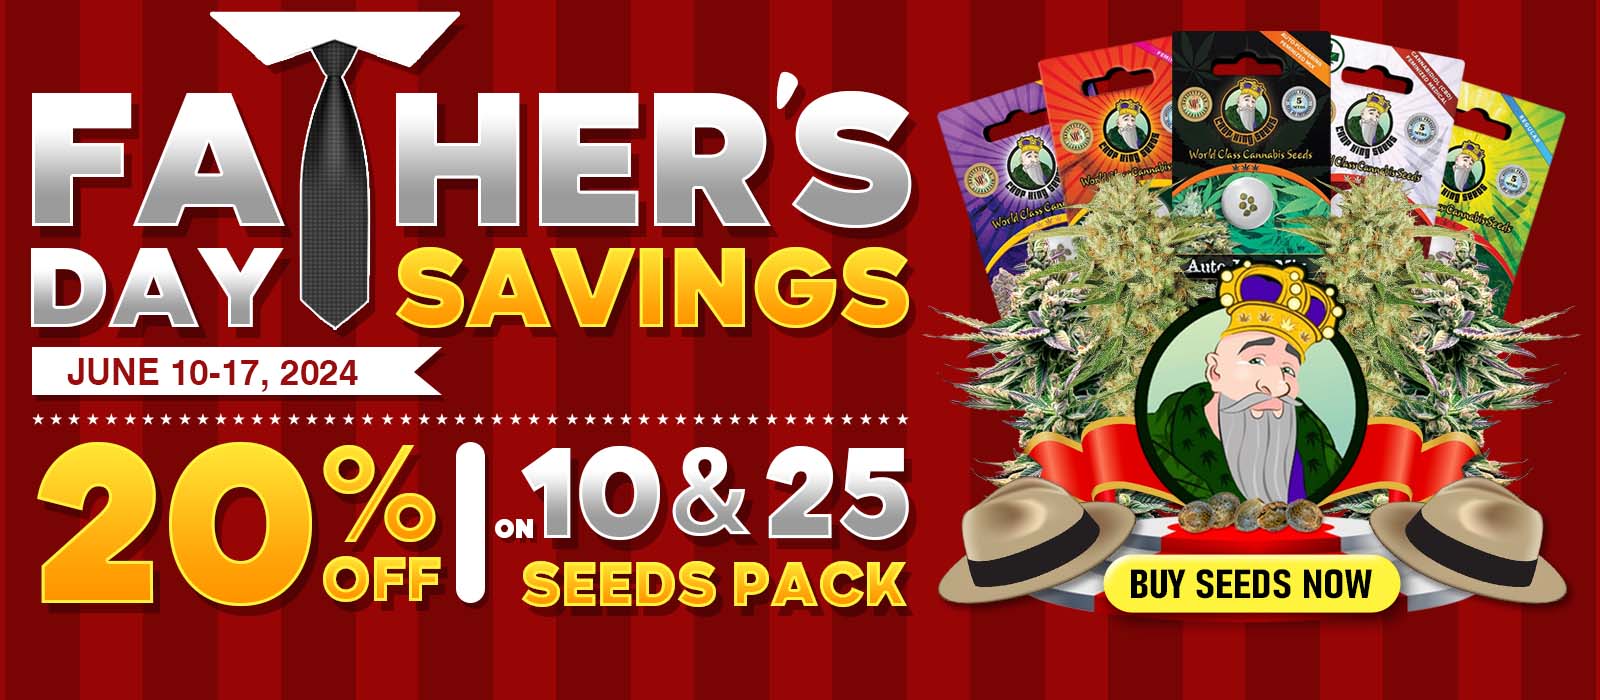 FAthers day Crop King Seeds.jpg